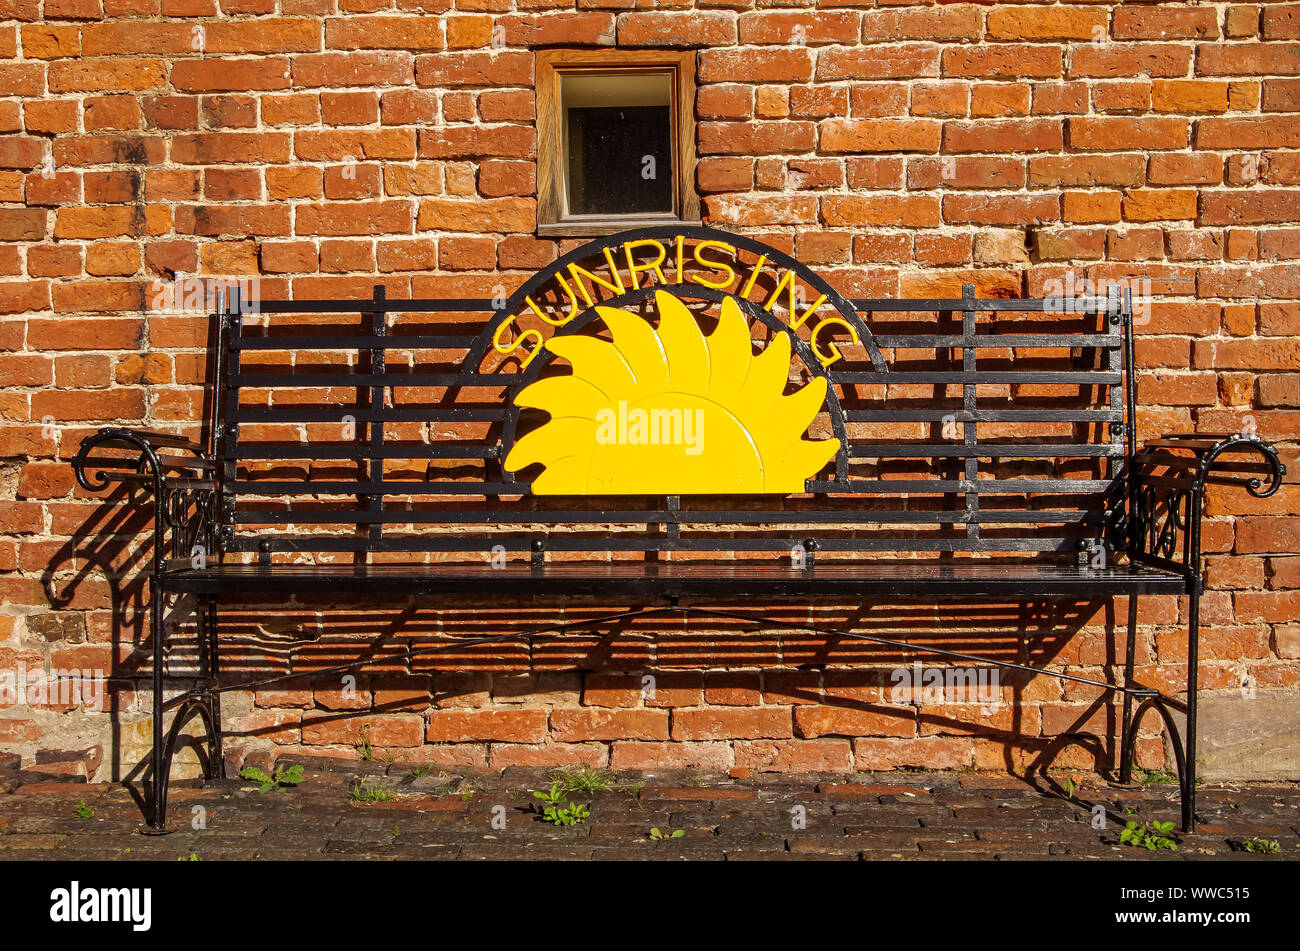 Sunrising sign in metal bench in front of red brick wall Stock Photo